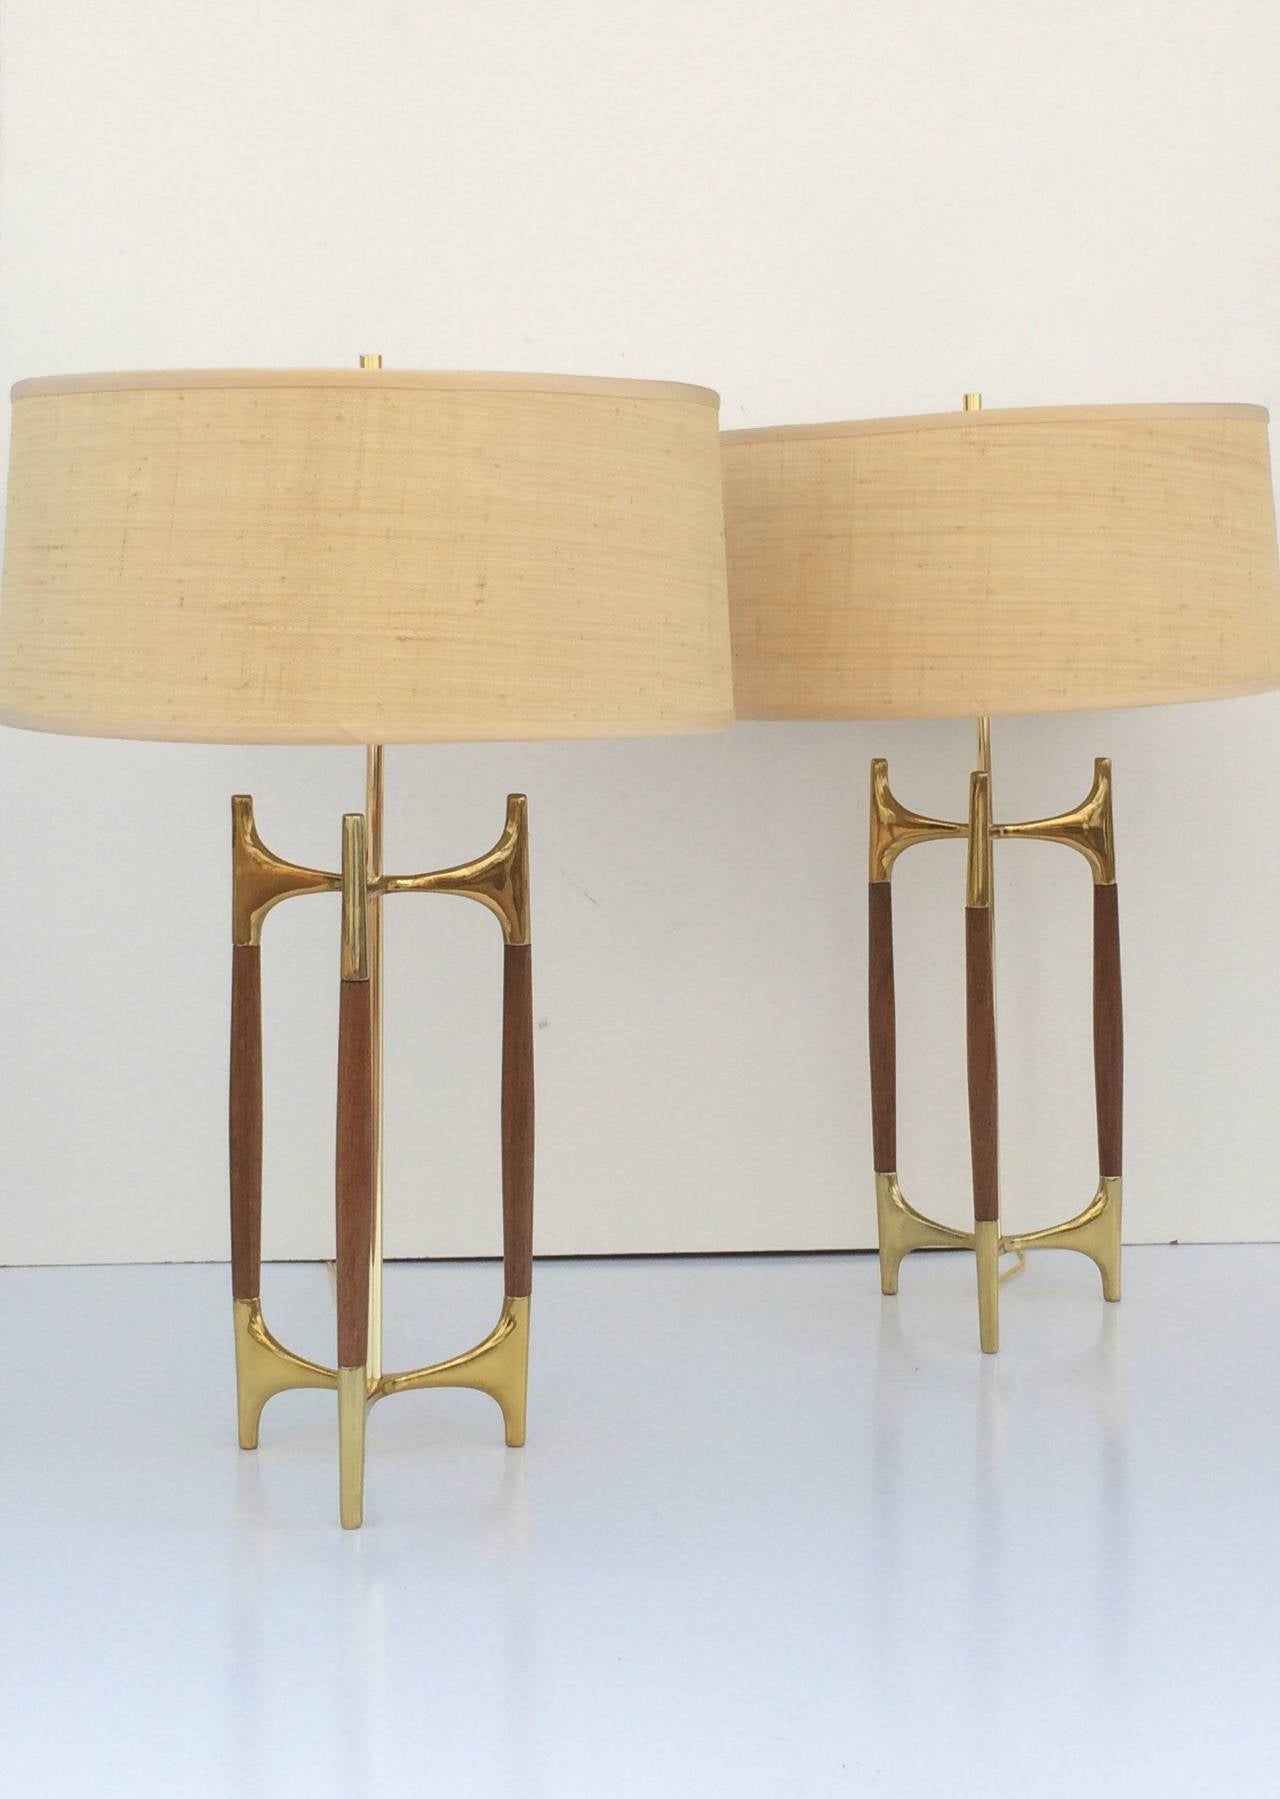 A pair of brass and walnut table lamps designed by Gerald Thurston and made by Lightolier, circa 1950s.
Newly rewired with new custom-made shades.